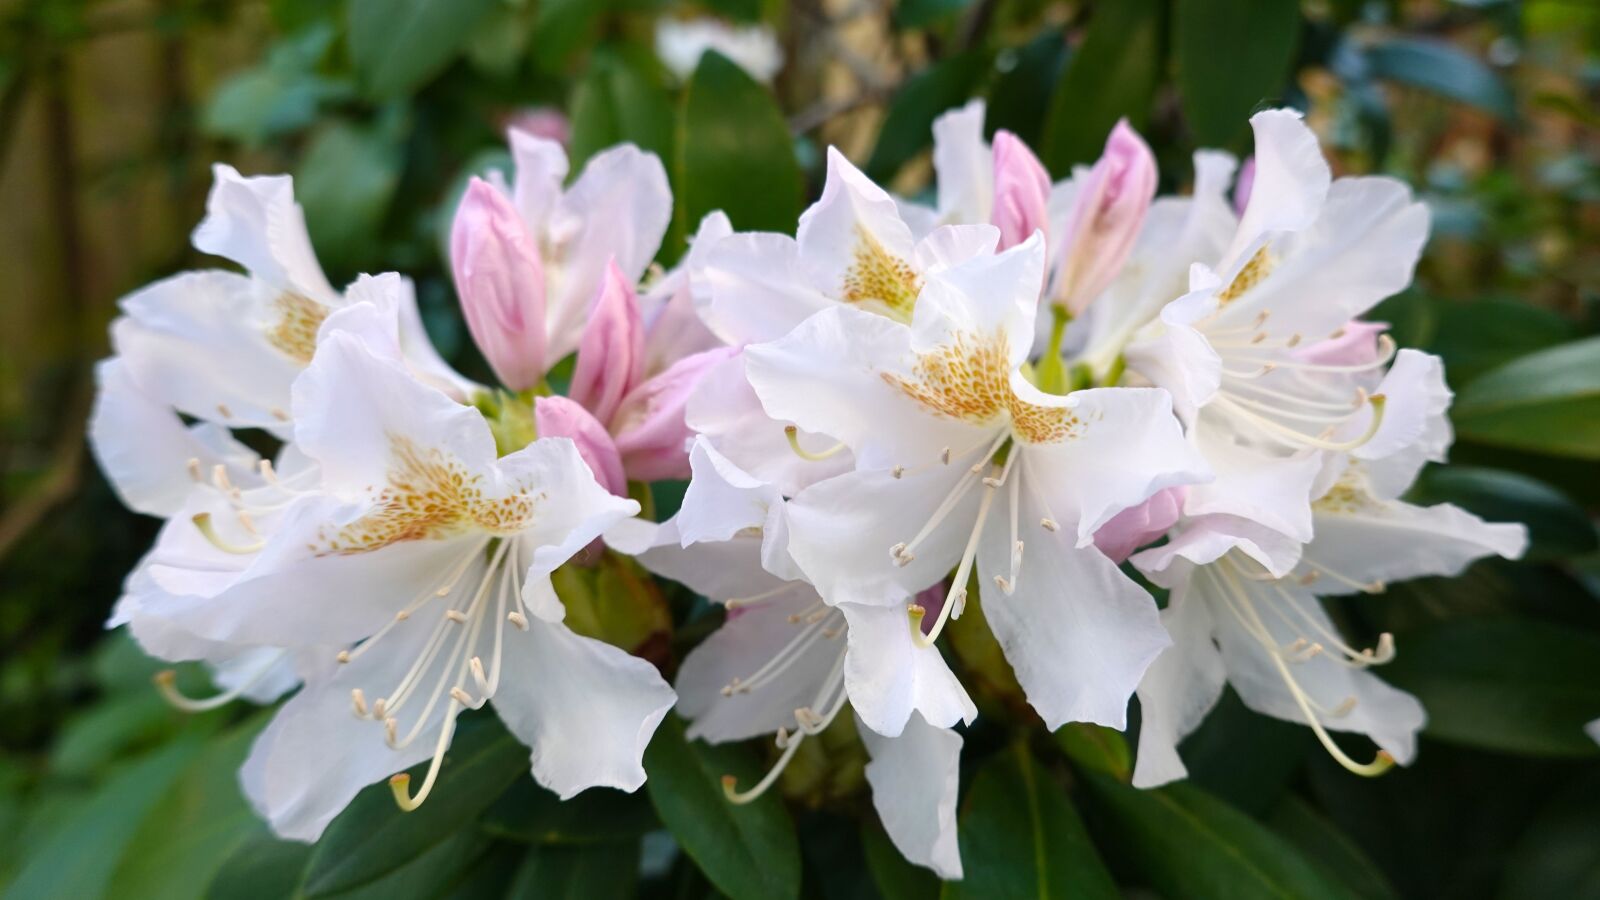 Sony Cyber-shot DSC-RX100 VI sample photo. Rhododendron, white-pink, flower photography